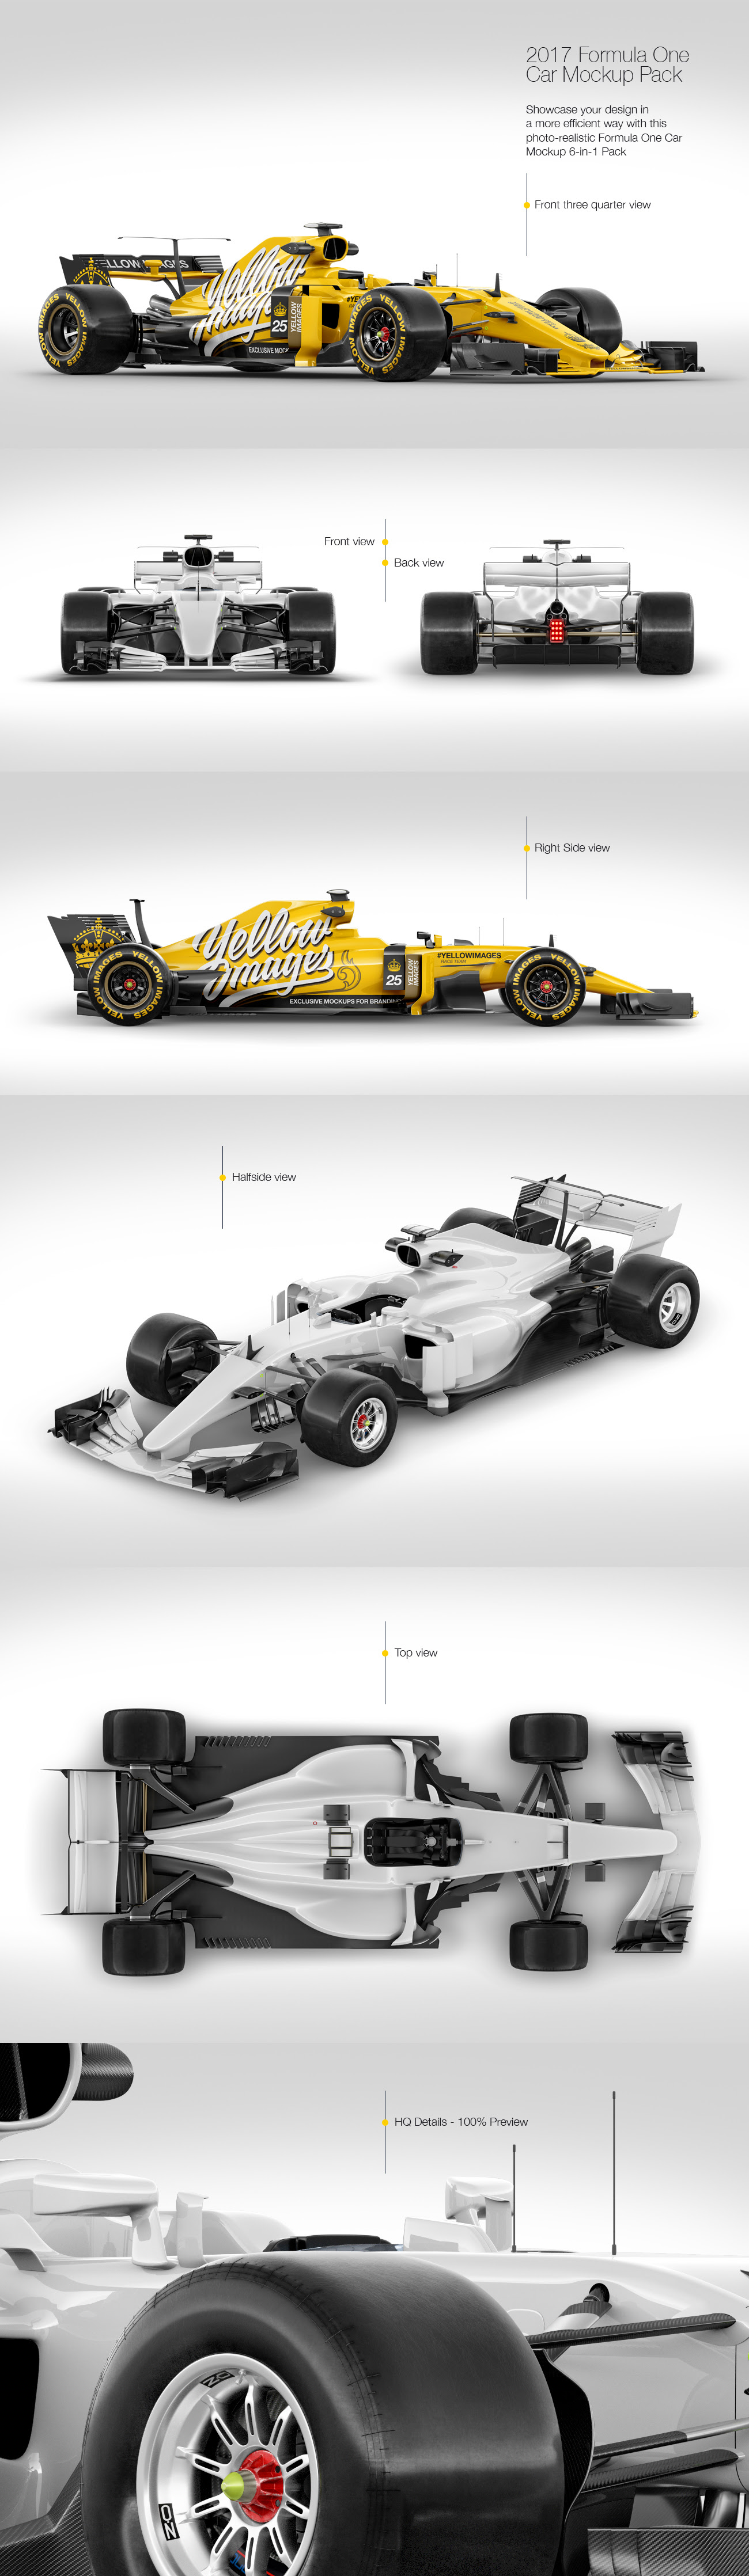 2017 Formula 1 Car Mockup Pack in Handpicked Sets of Vehicles on Yellow